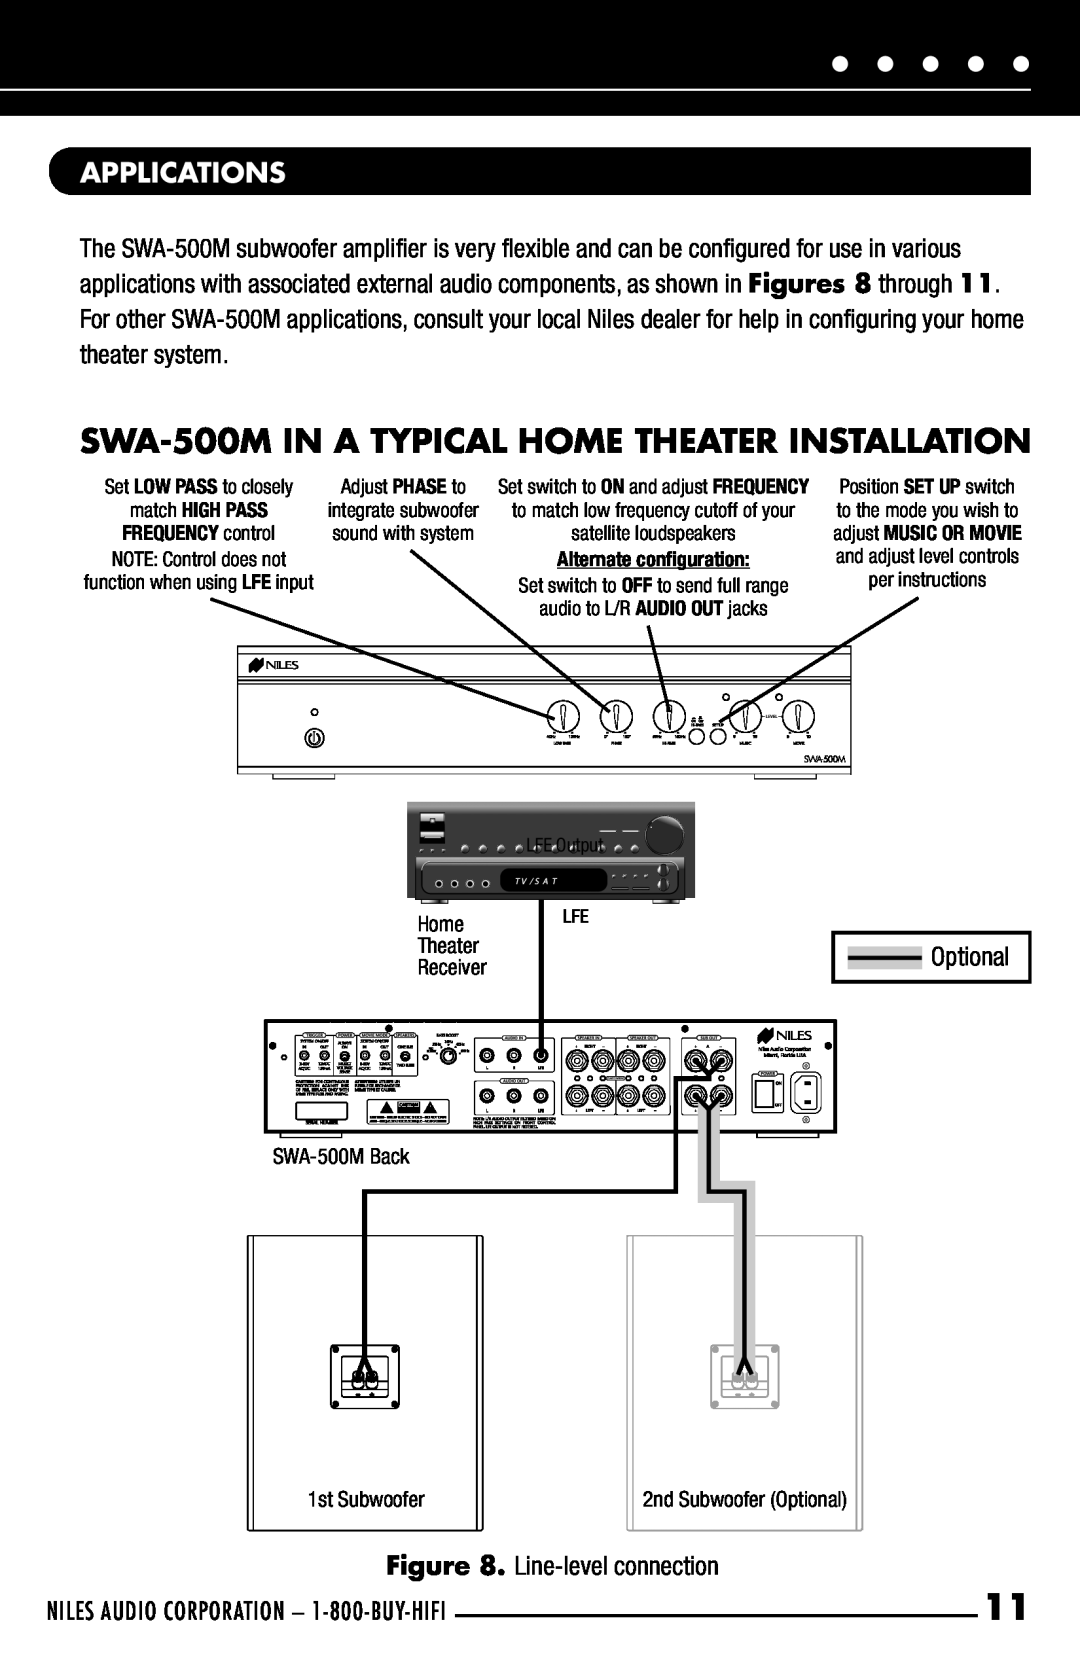 Niles Audio manual SWA-500MIN A TYPICAL HOME THEATER INSTALLATION, Applications 